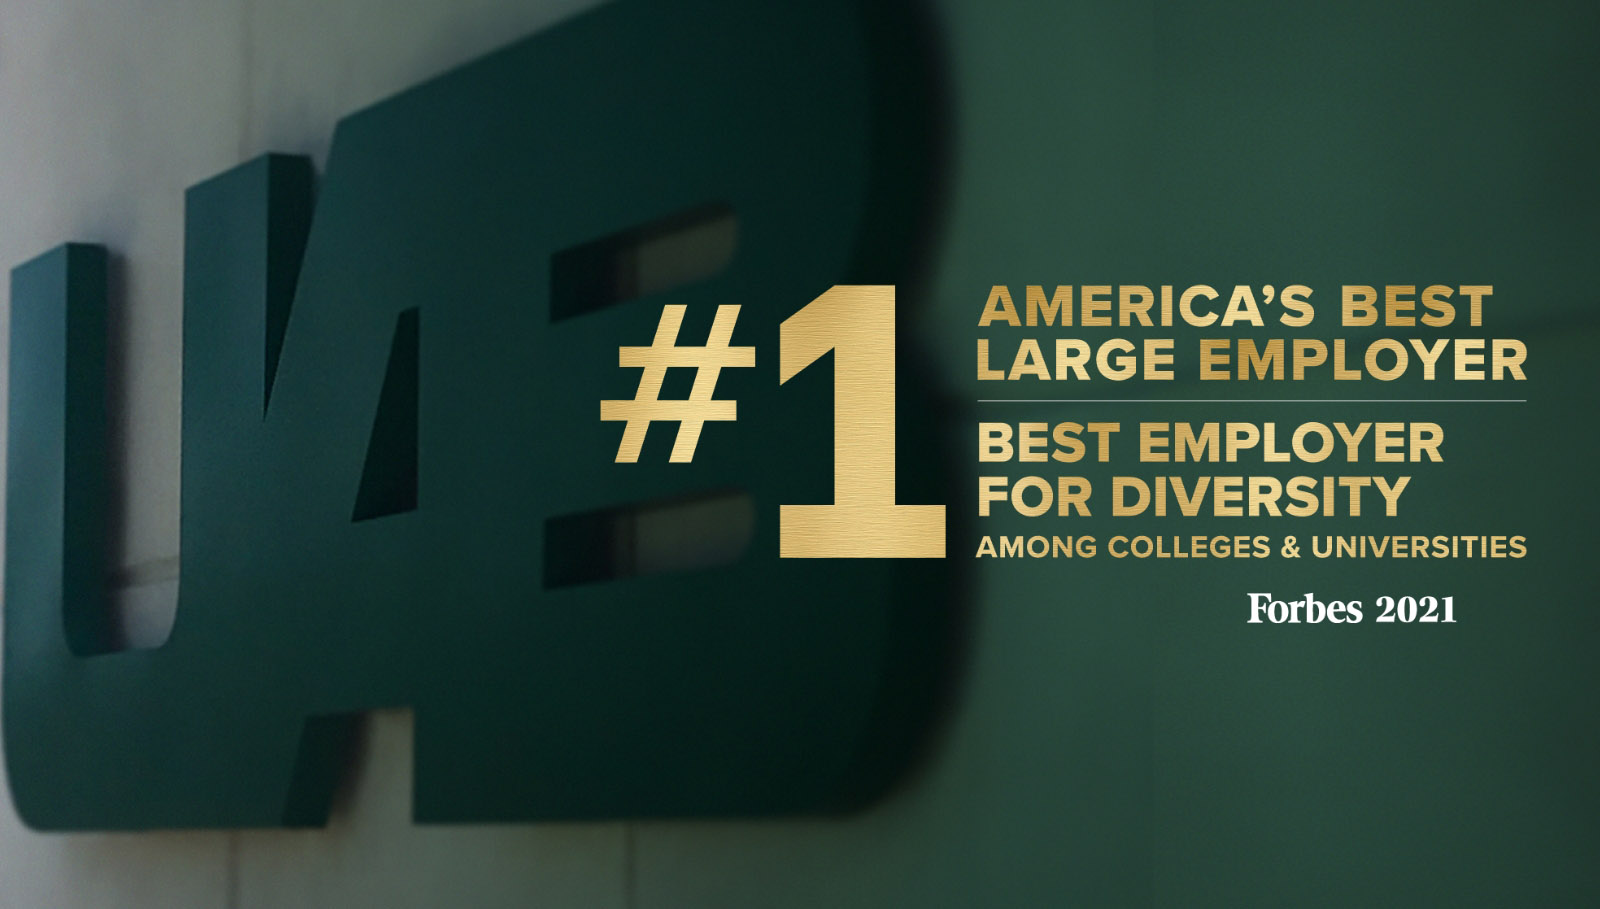 #1 America's best large employer and best employer for diversity among colleges and universities in 2021 according to Forbes